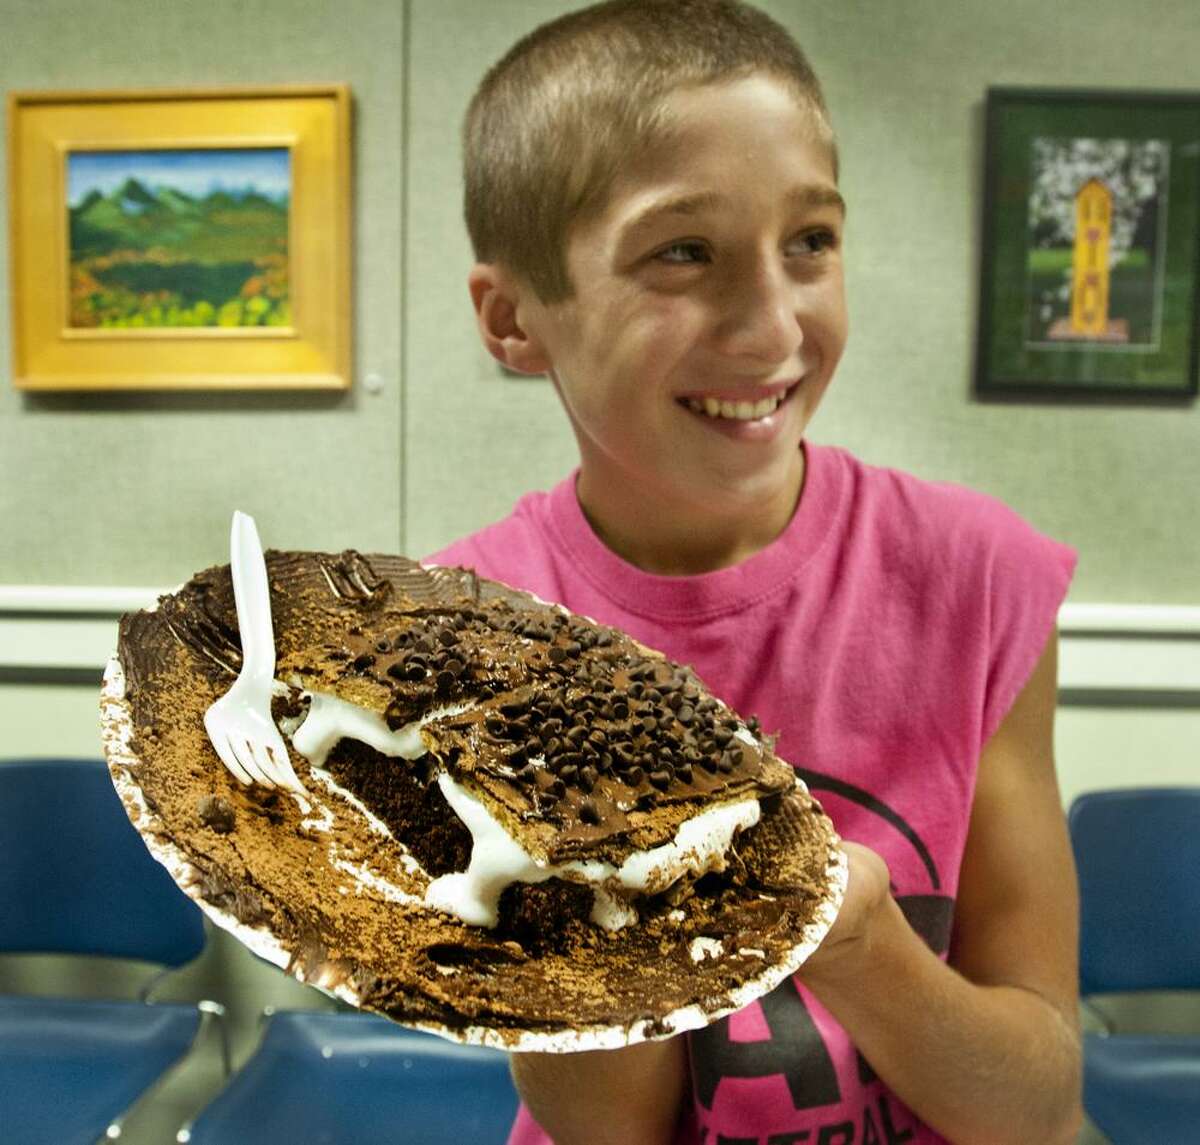 Matthew D'Onofrio, 12, of Orange, holds up his winning entry "Stuffed S'More Surprise" at the kids Iron Chef competition held at the Case Memorial Library. Melanie Stengel/Register